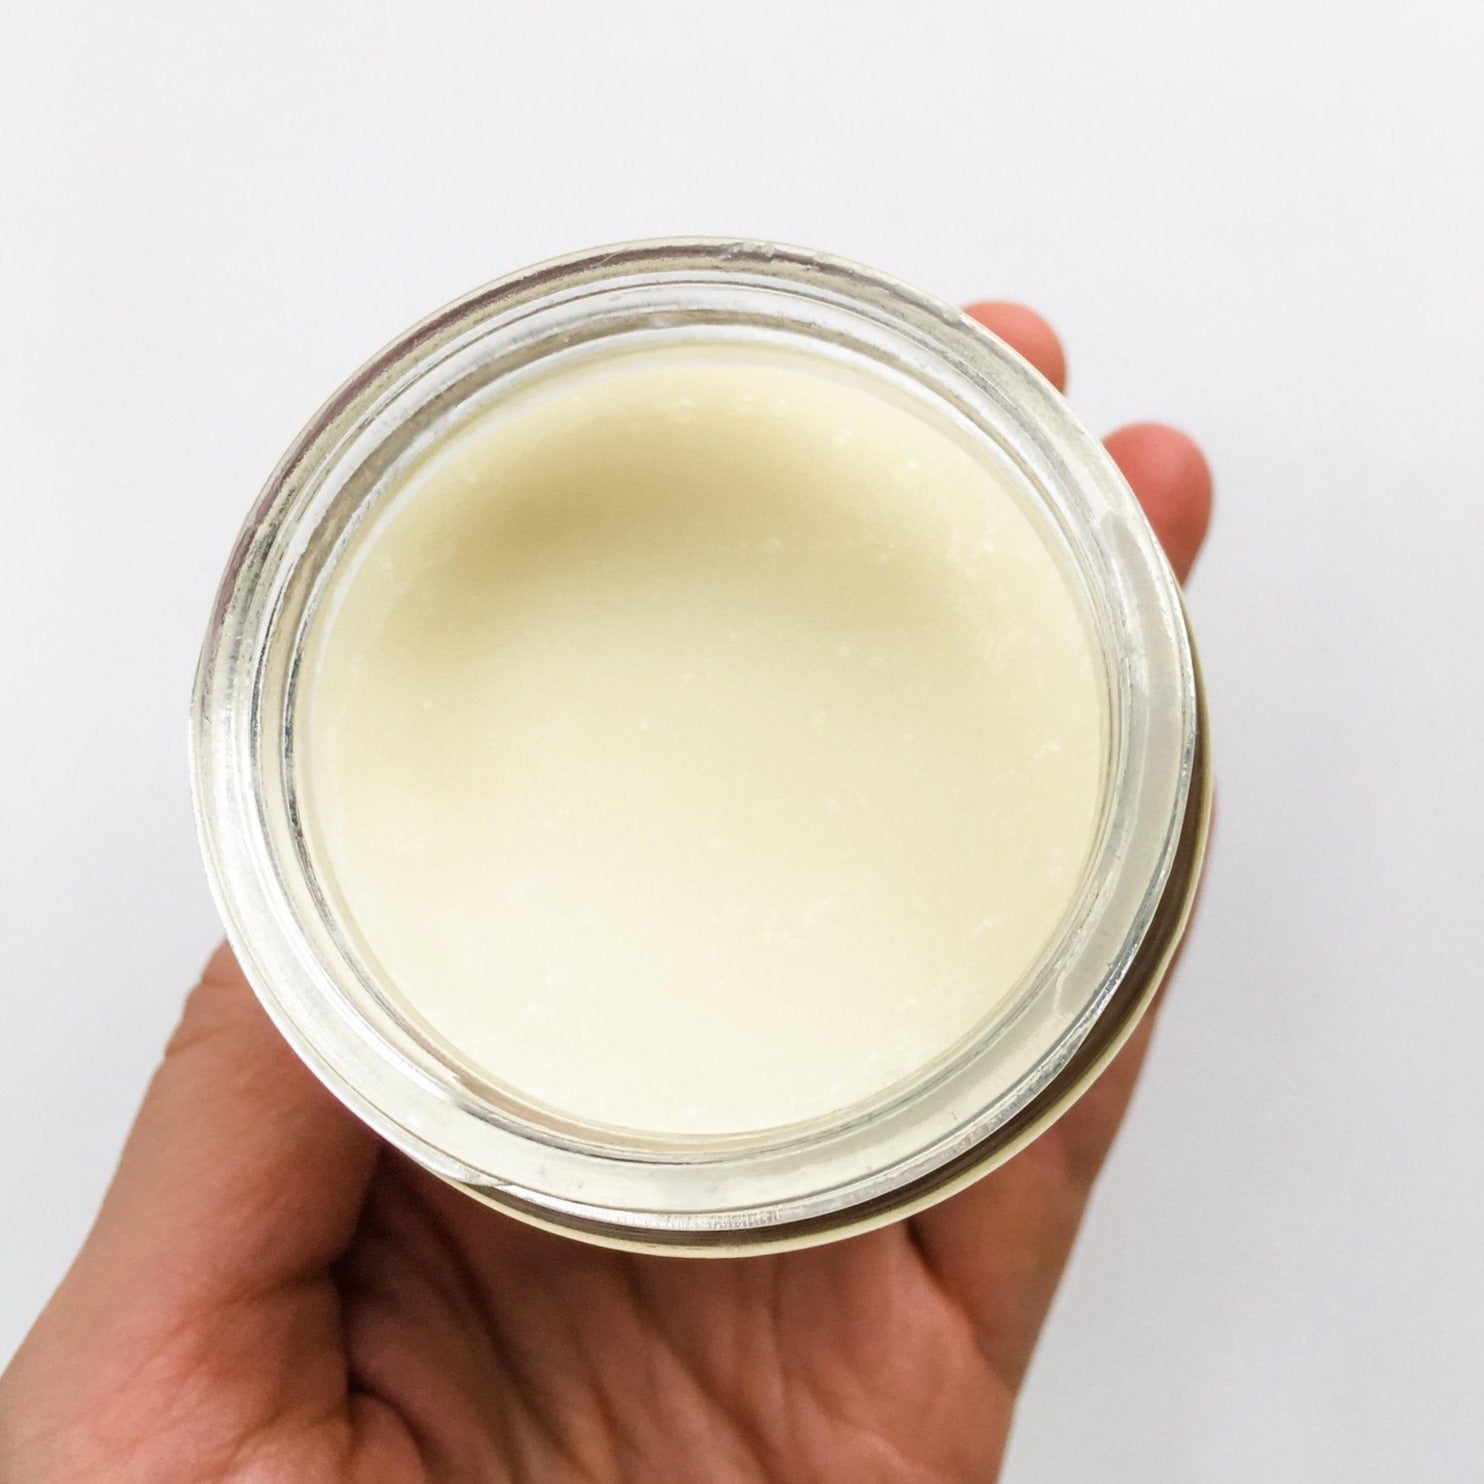 Two of Earth solid tallow balm